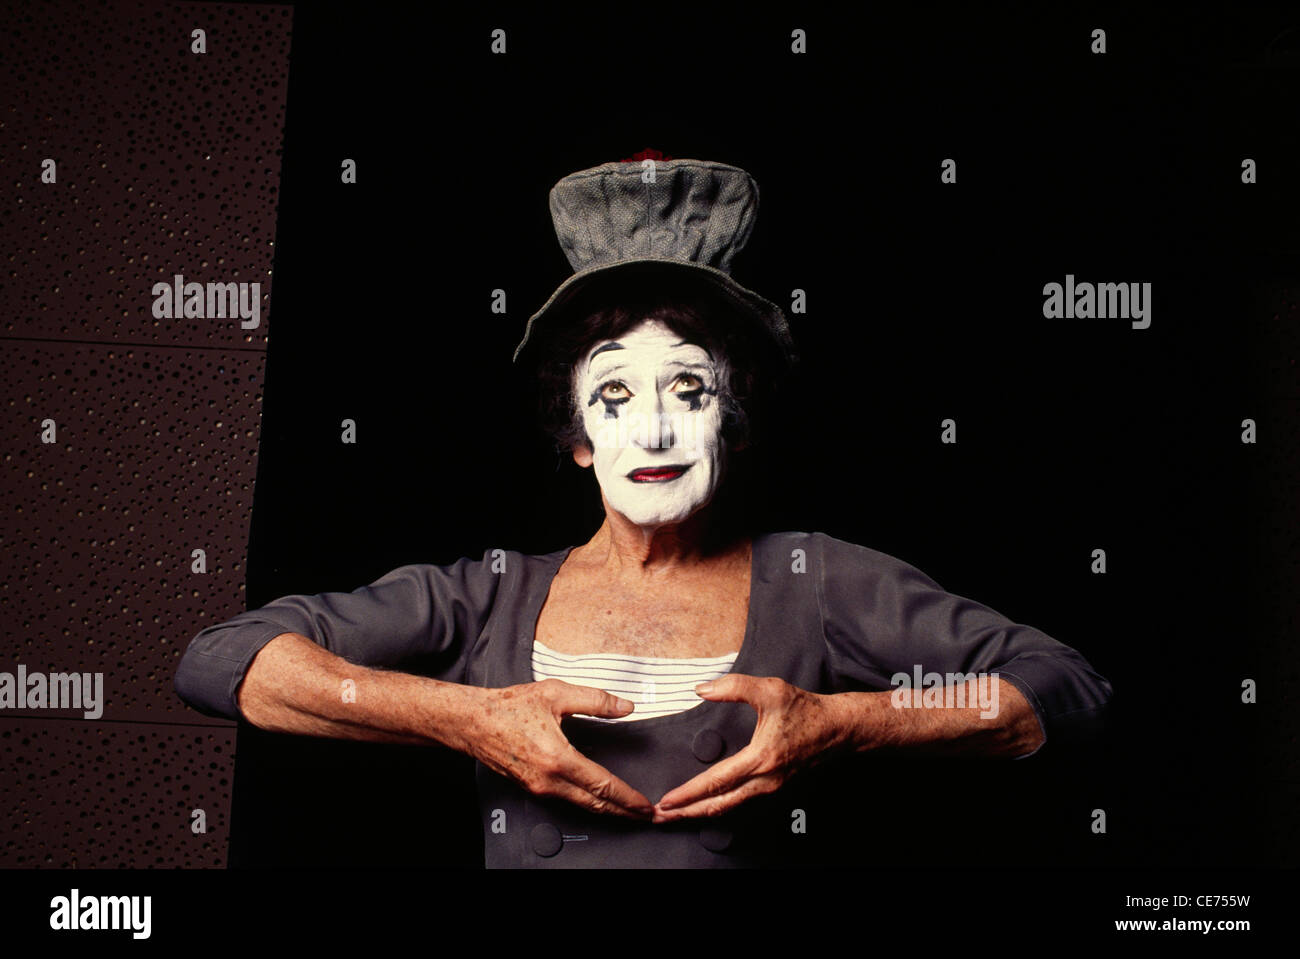 Marcel Marceau, French actor, mime artist, famous for stage persona 'Bip the Clown', mime as the art of silence, No model release, editorial use only Stock Photo